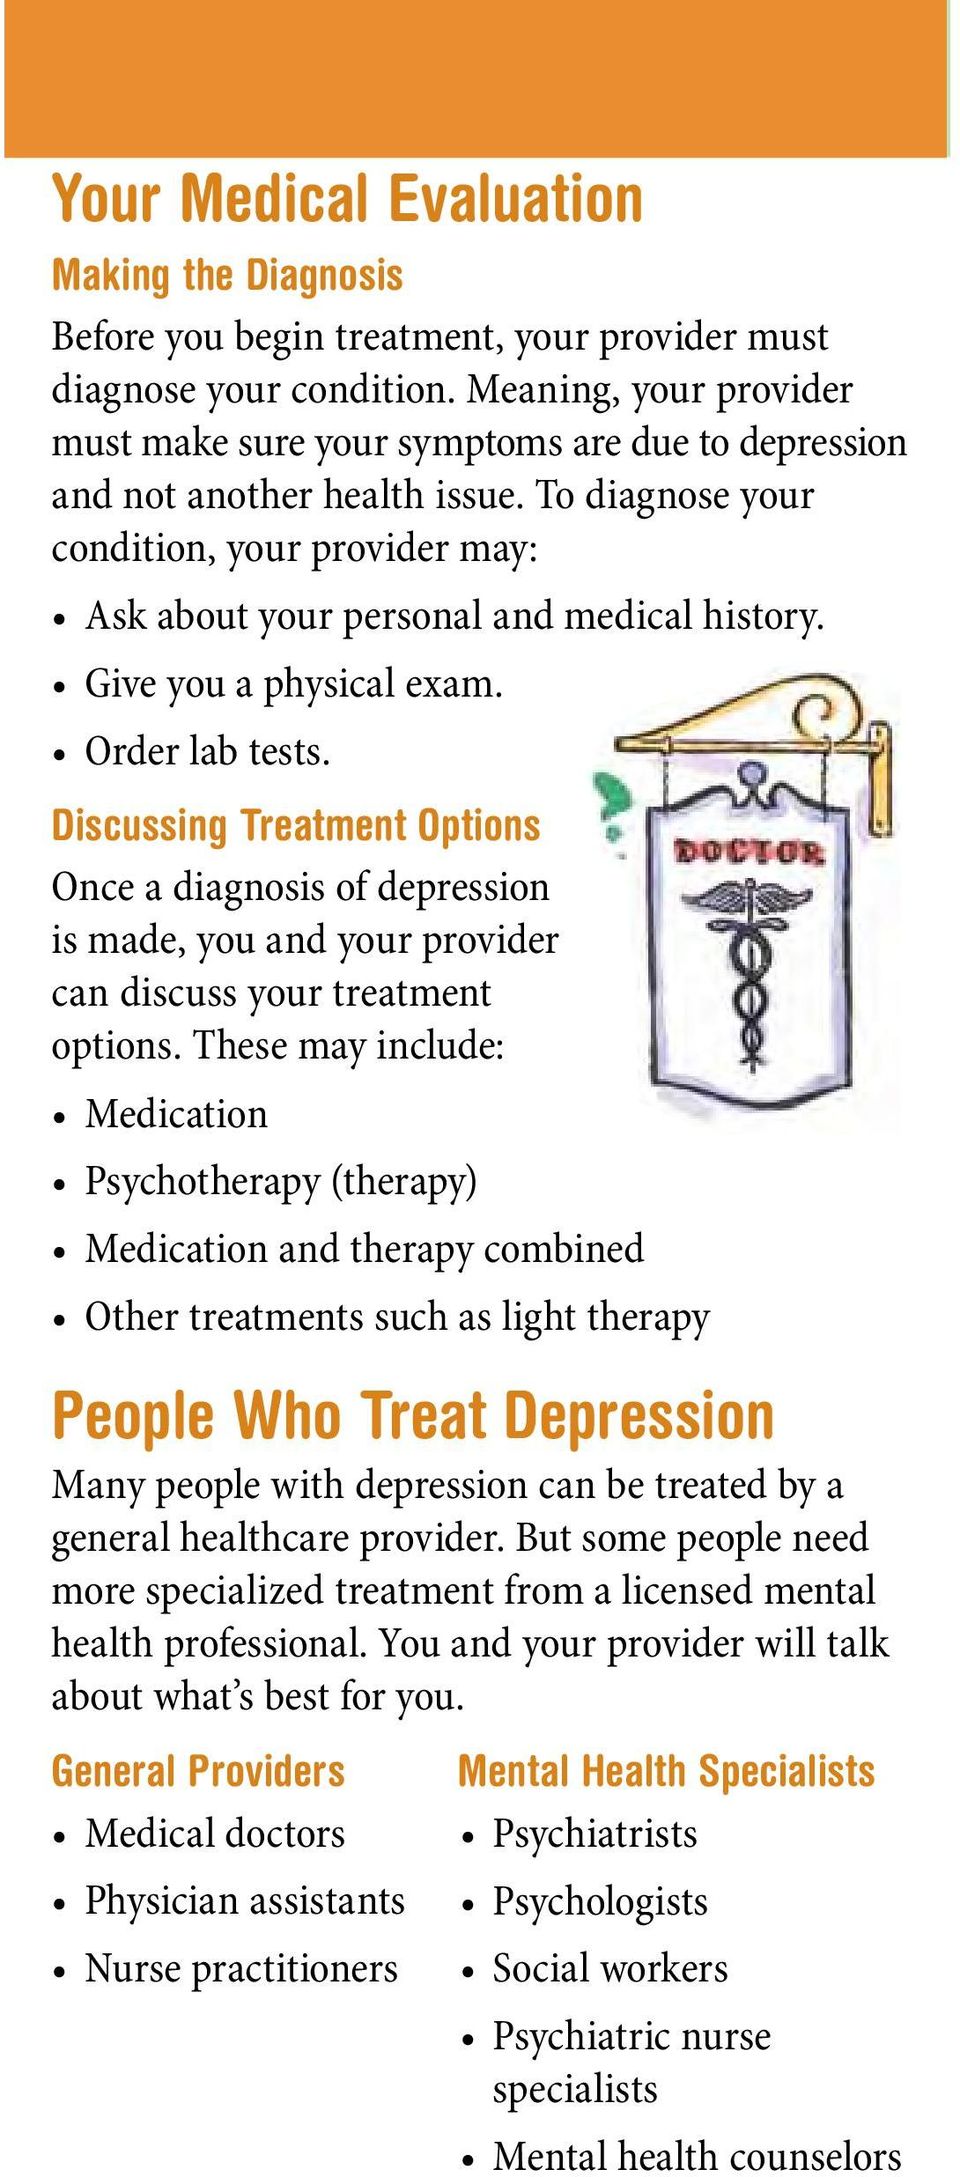 Give you a physical exam. Order lab tests. Discussing Treatment Options Once a diagnosis of depression is made, you and your provider can discuss your treatment options.